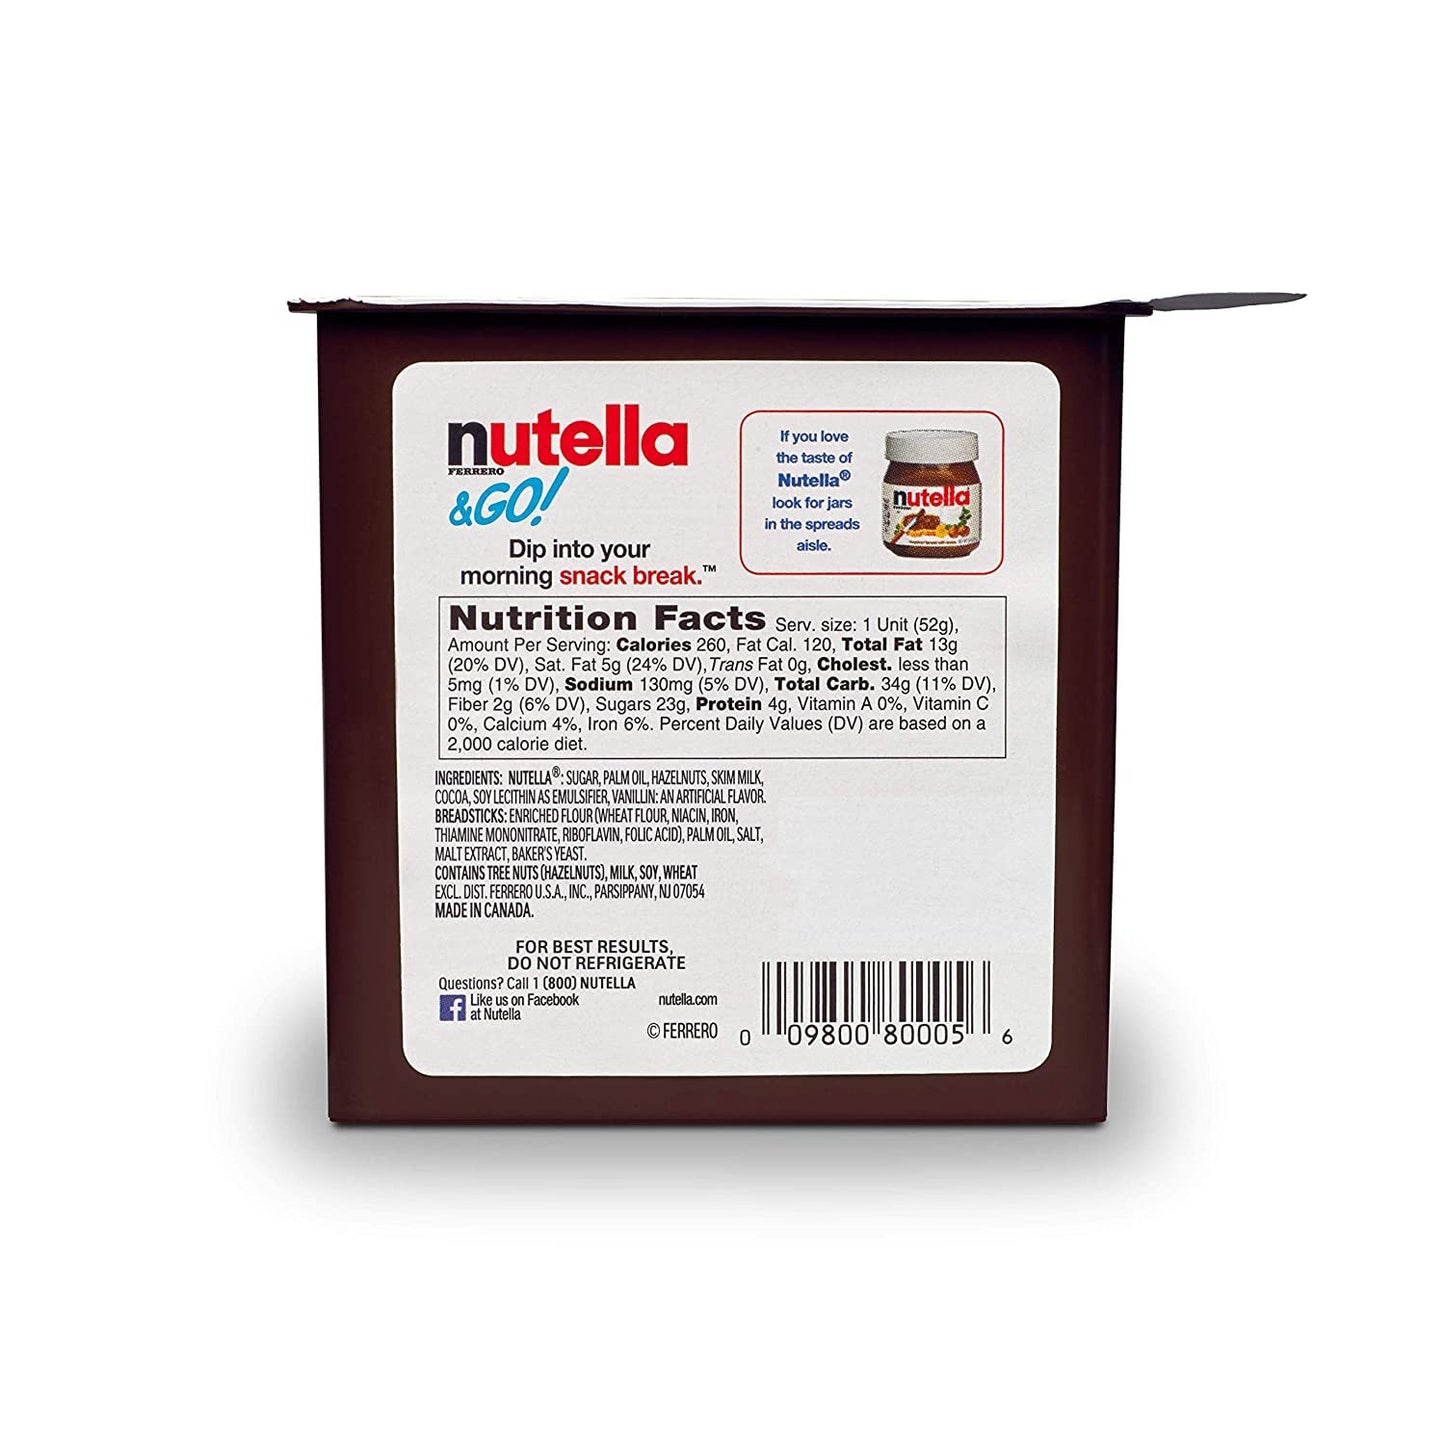 Nutella and Go Snack Packs, Chocolate Hazelnut Spread with Breadsticks, Perfect Valentine's Day Gifts and Bulk Snacks for Kids' Lunch Boxes, 1.8 oz, Pack of 24